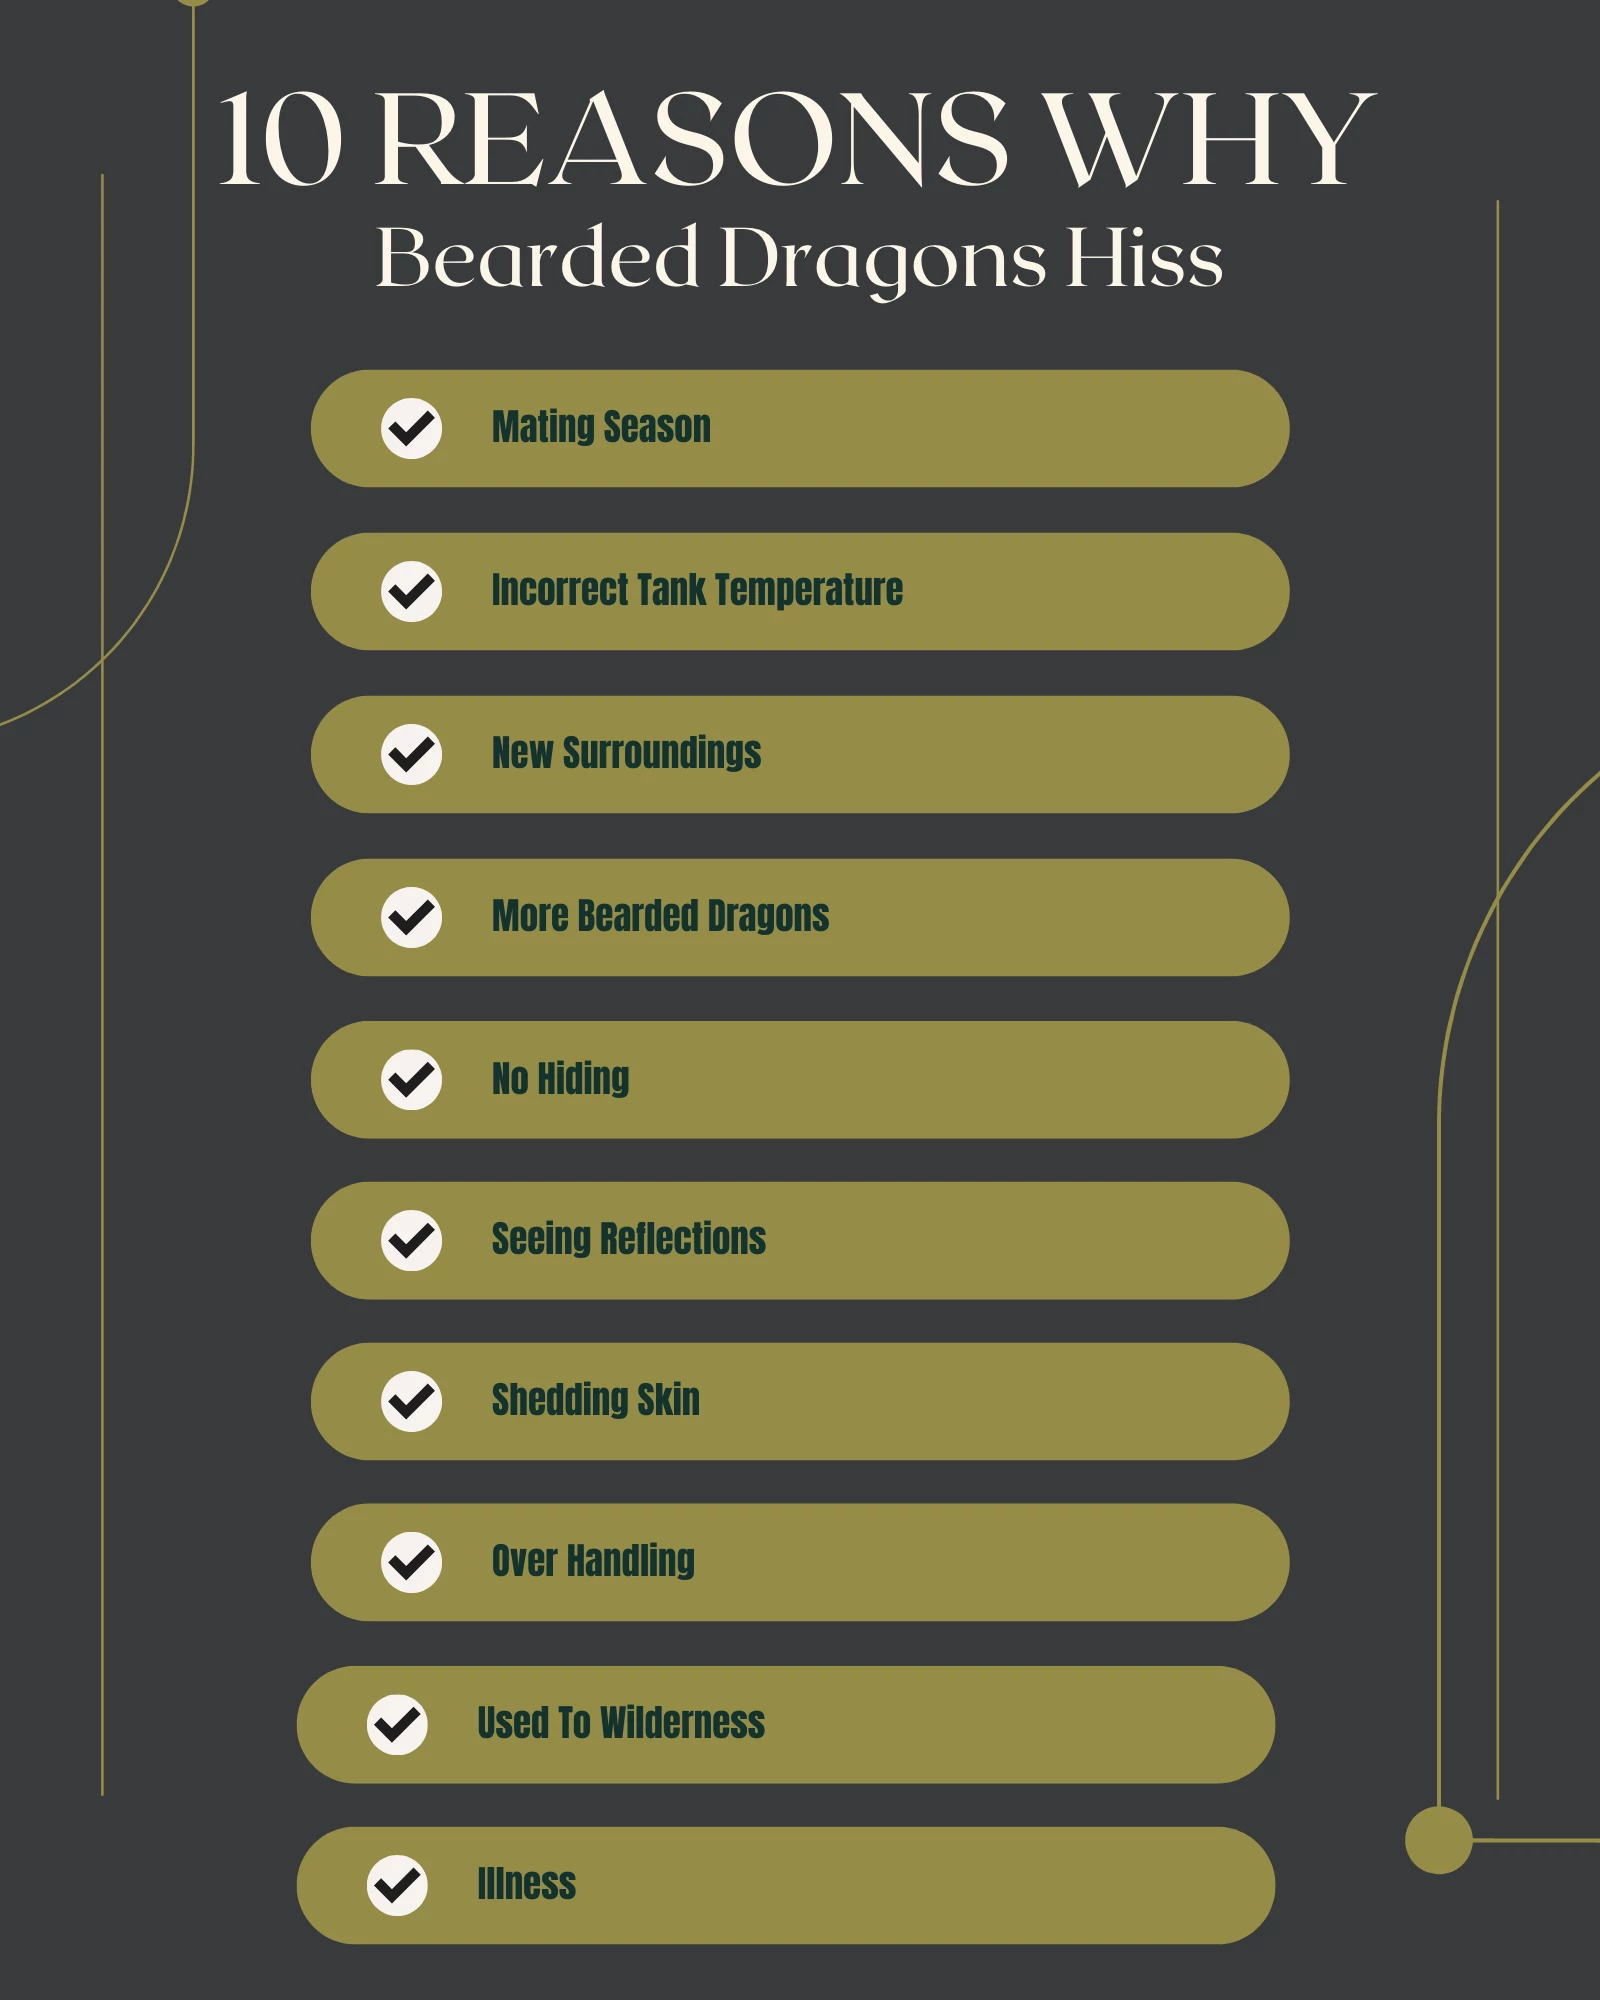 Reasons For Hissing Bearded Dragons